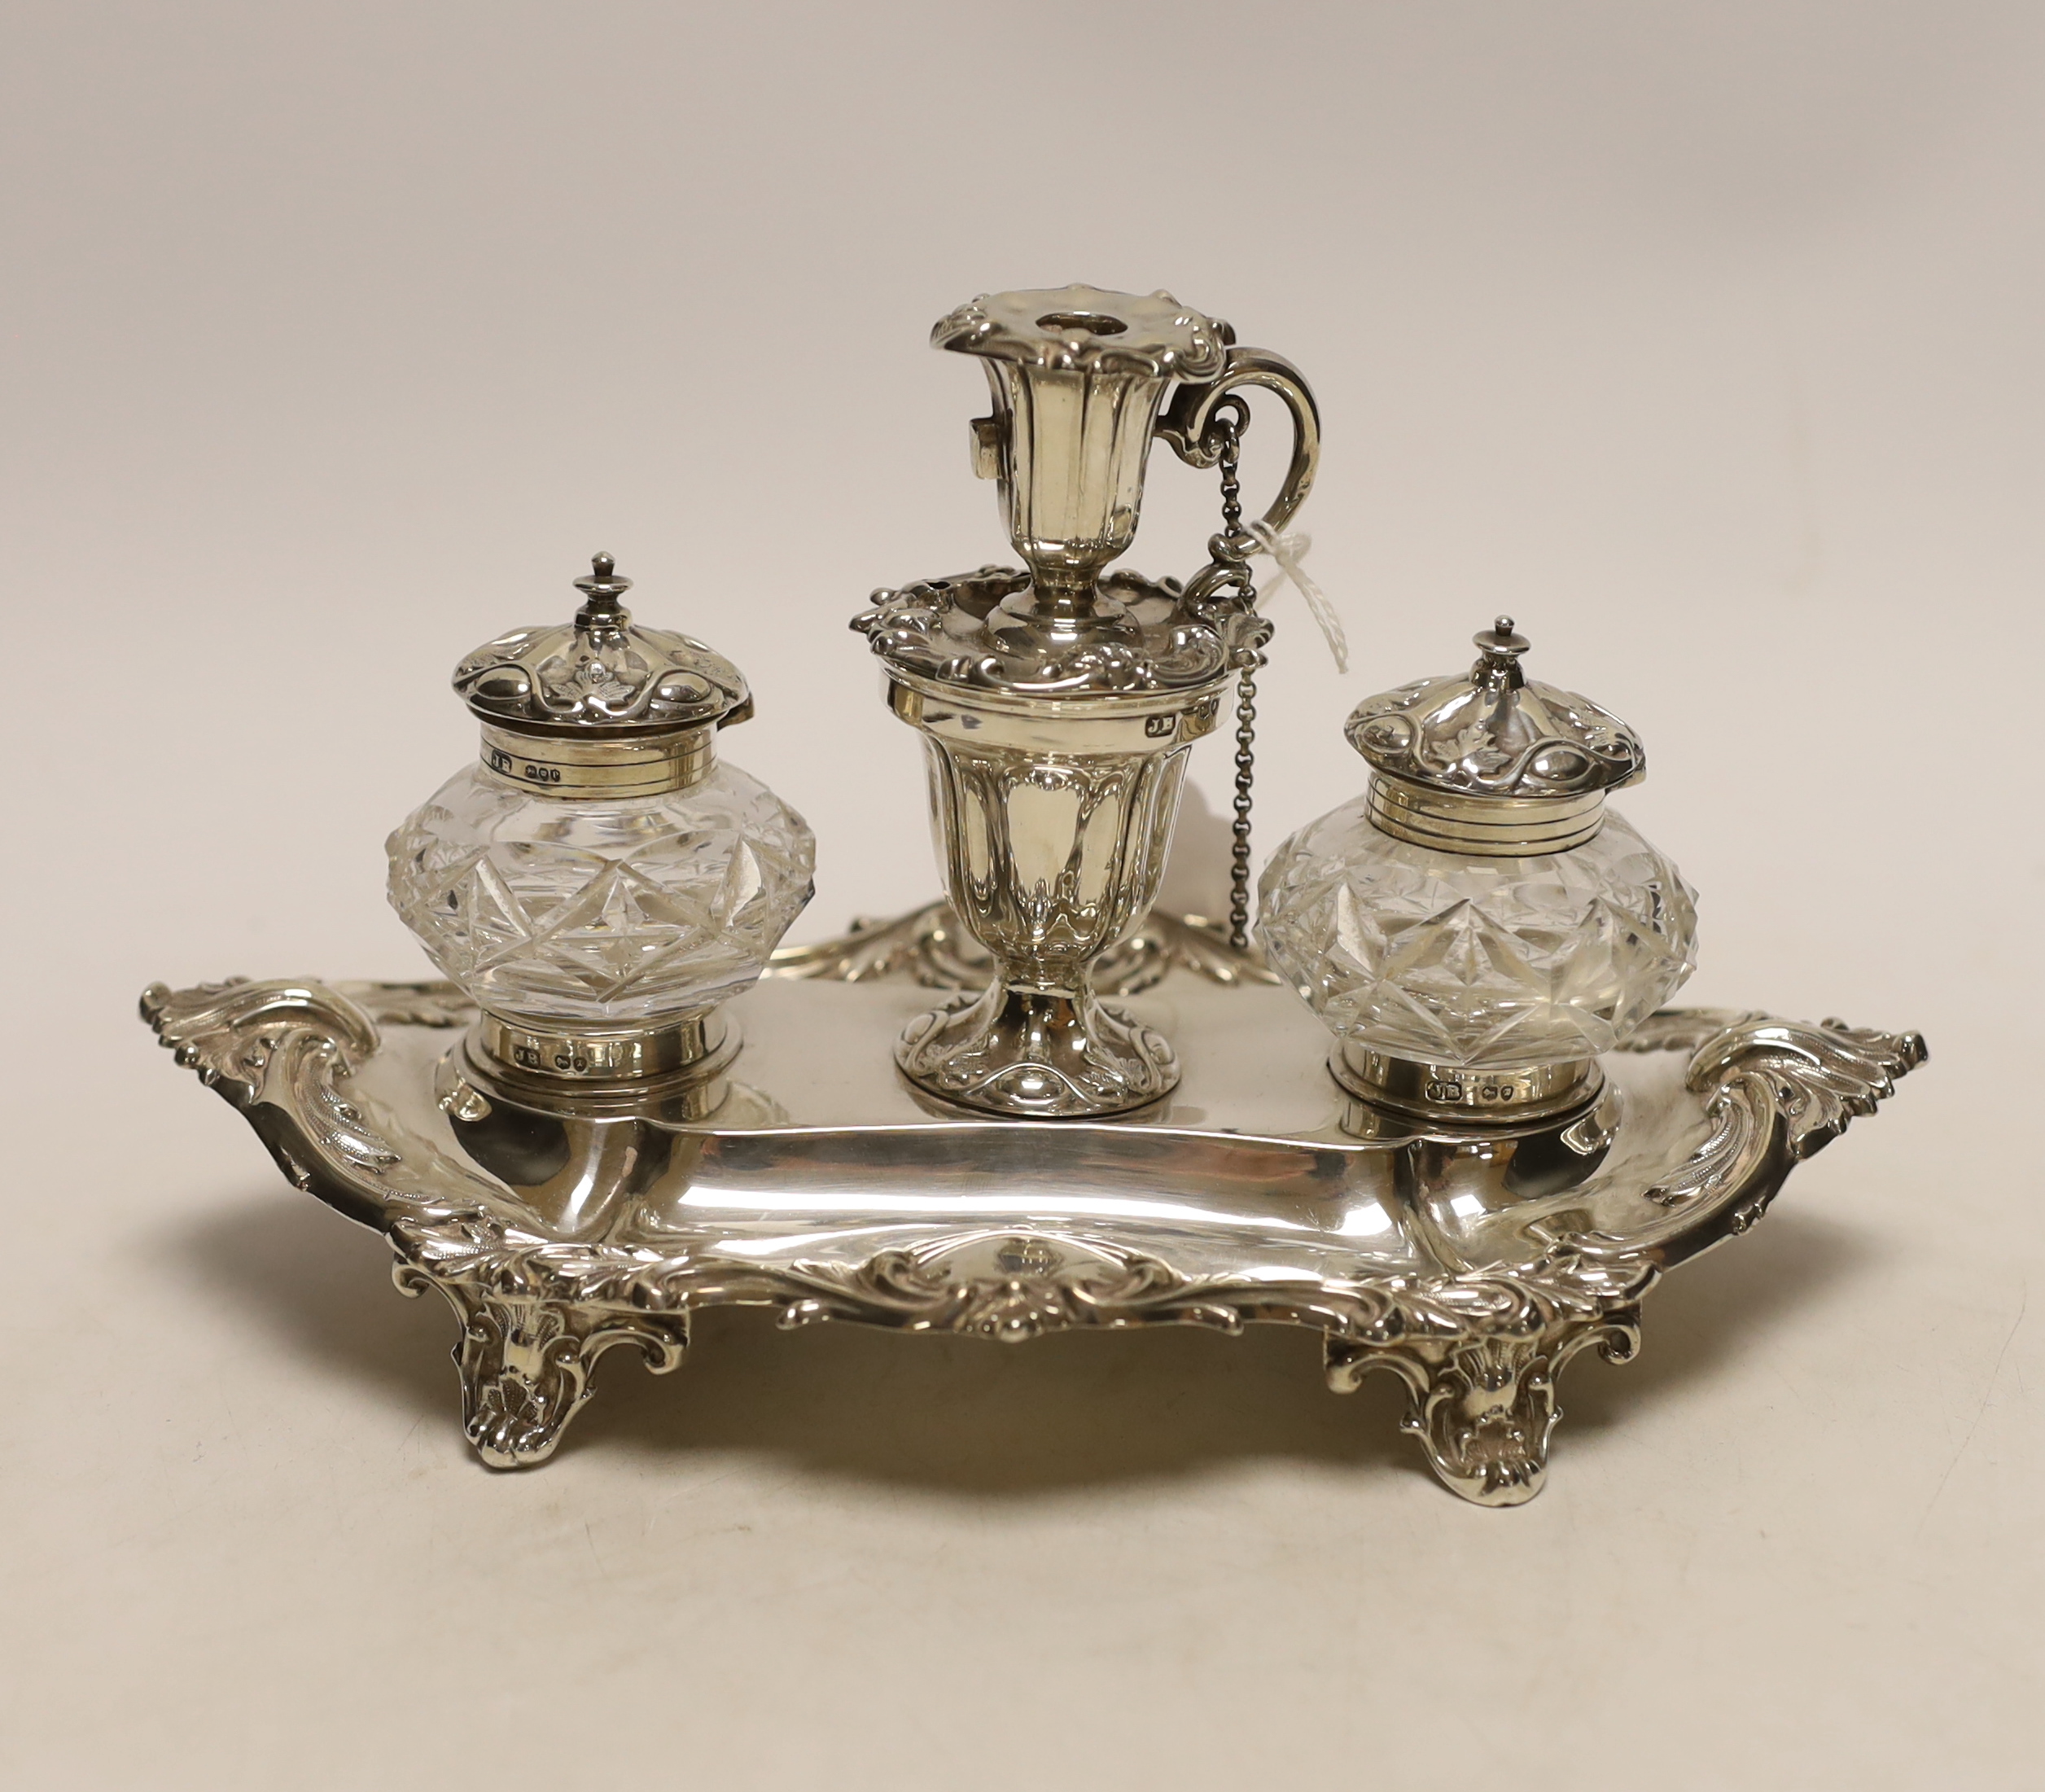 A Victorian silver inkstand, with two mounted glass wells and central removable chamberstick, John Brashier?, London, 1890, 23.4cm, 9.6oz (a.f.).